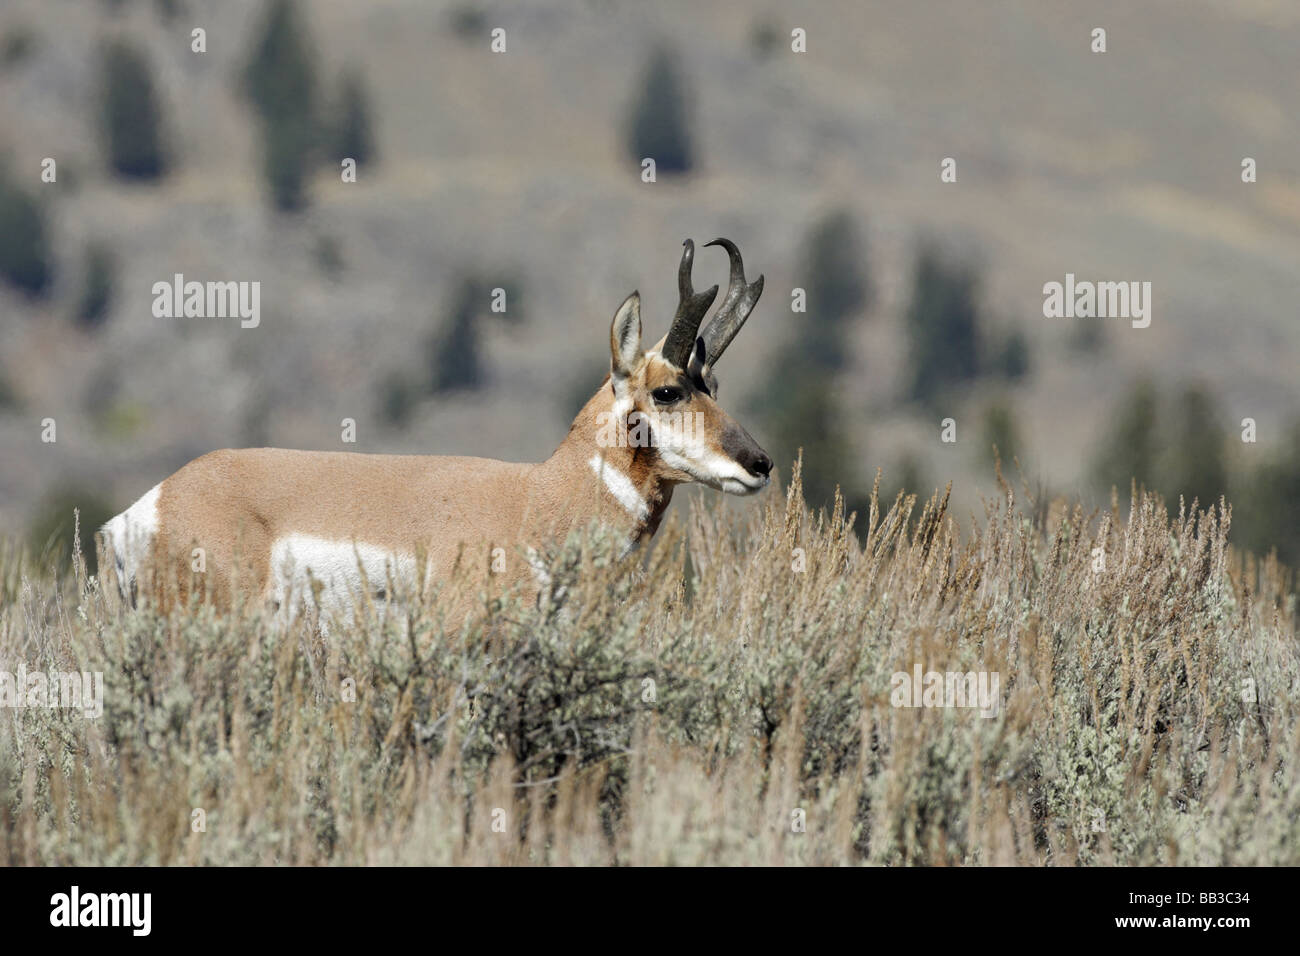 Pronghorn Antelope Antilocapra americana male stag standing in the sage brush Stock Photo